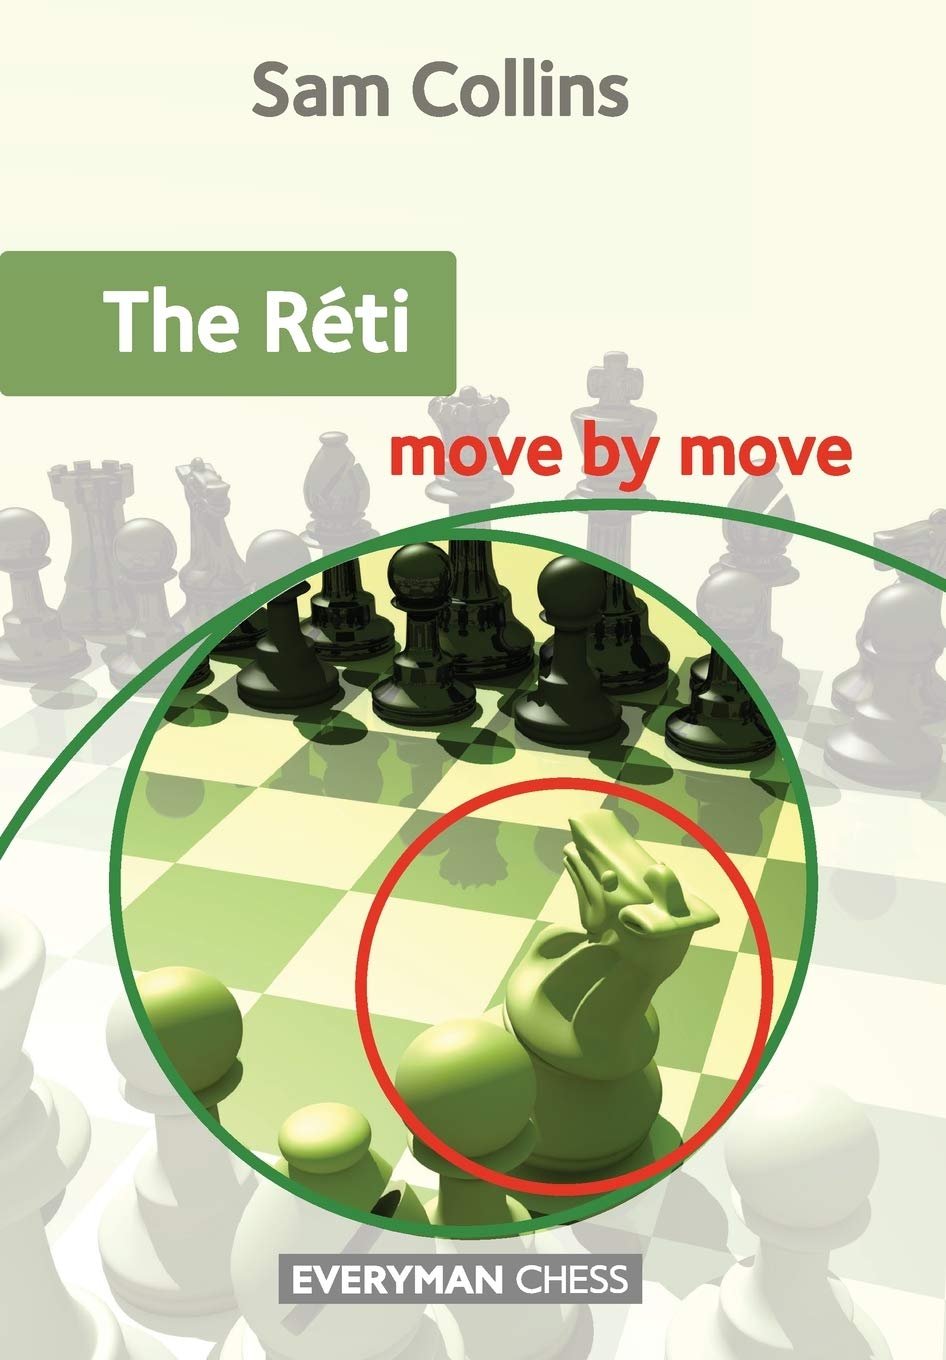 The Réti: Move by Move, Sam Collins, Everyman Chess, 30th September 2020, ISBN-13 ‏ : ‎ 978-1781944400